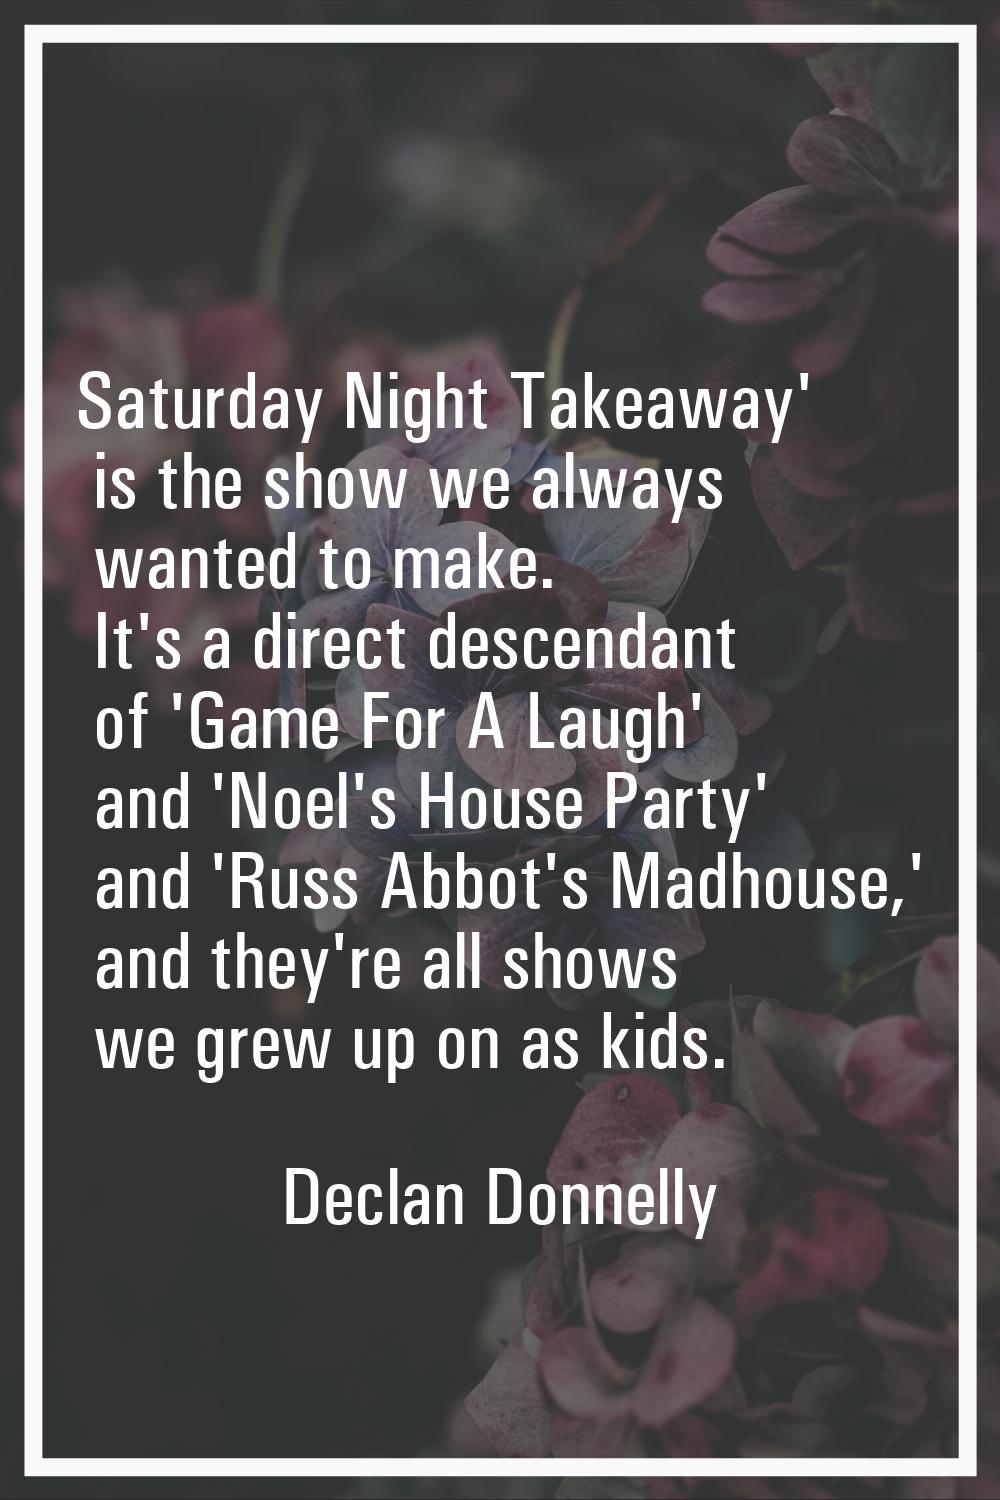 Saturday Night Takeaway' is the show we always wanted to make. It's a direct descendant of 'Game Fo